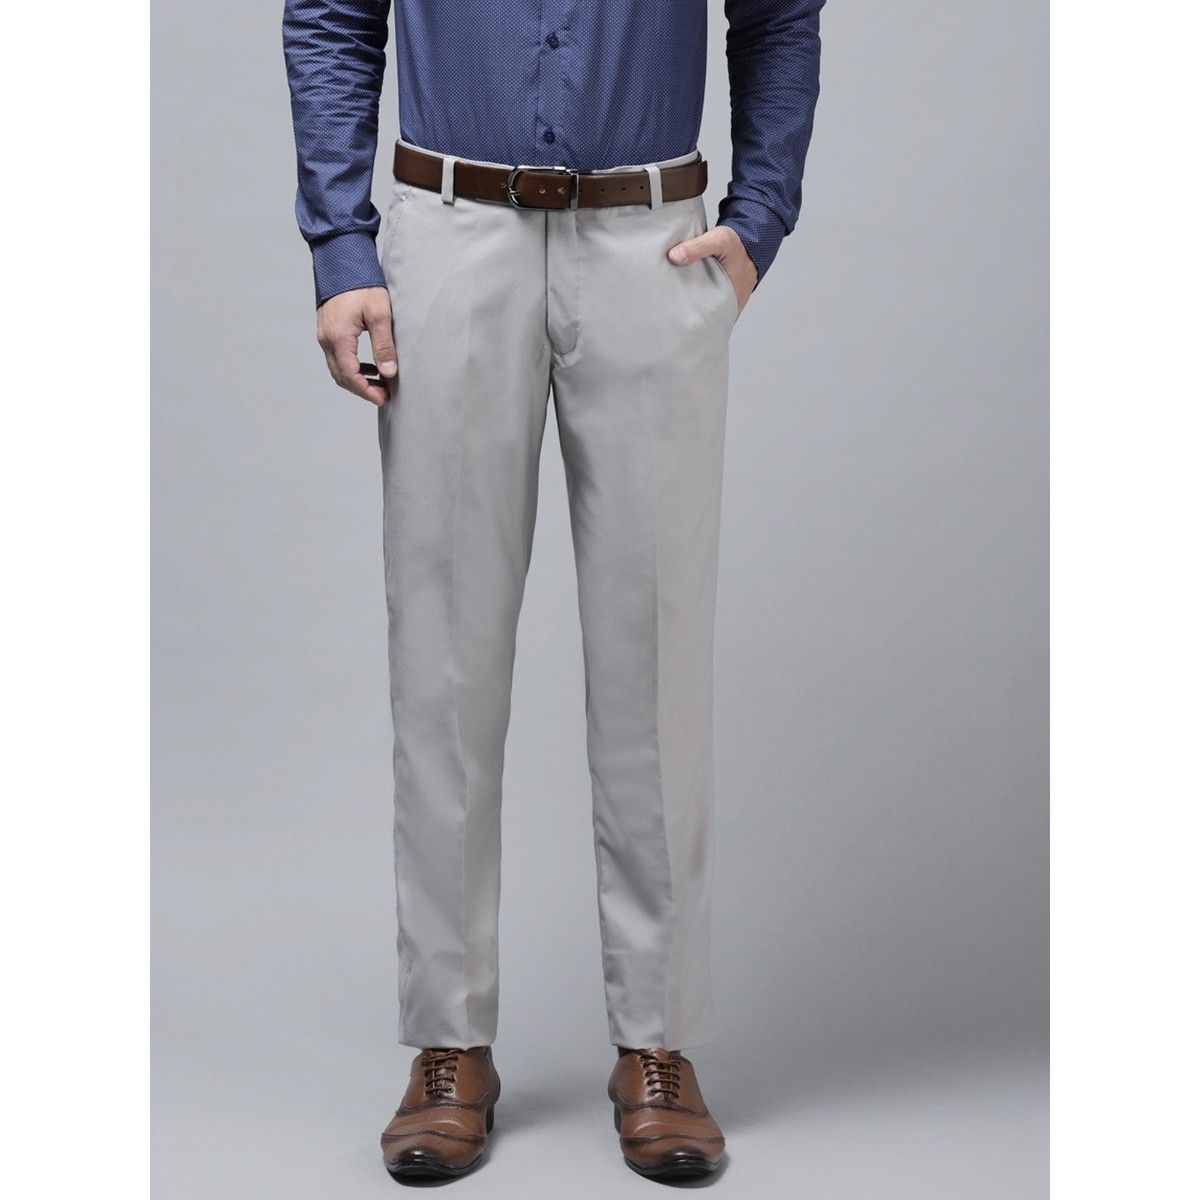 Buy online Mid Rise Solid Formal Trouser from Bottom Wear for Men by V-mart  for ₹569 at 5% off | 2024 Limeroad.com